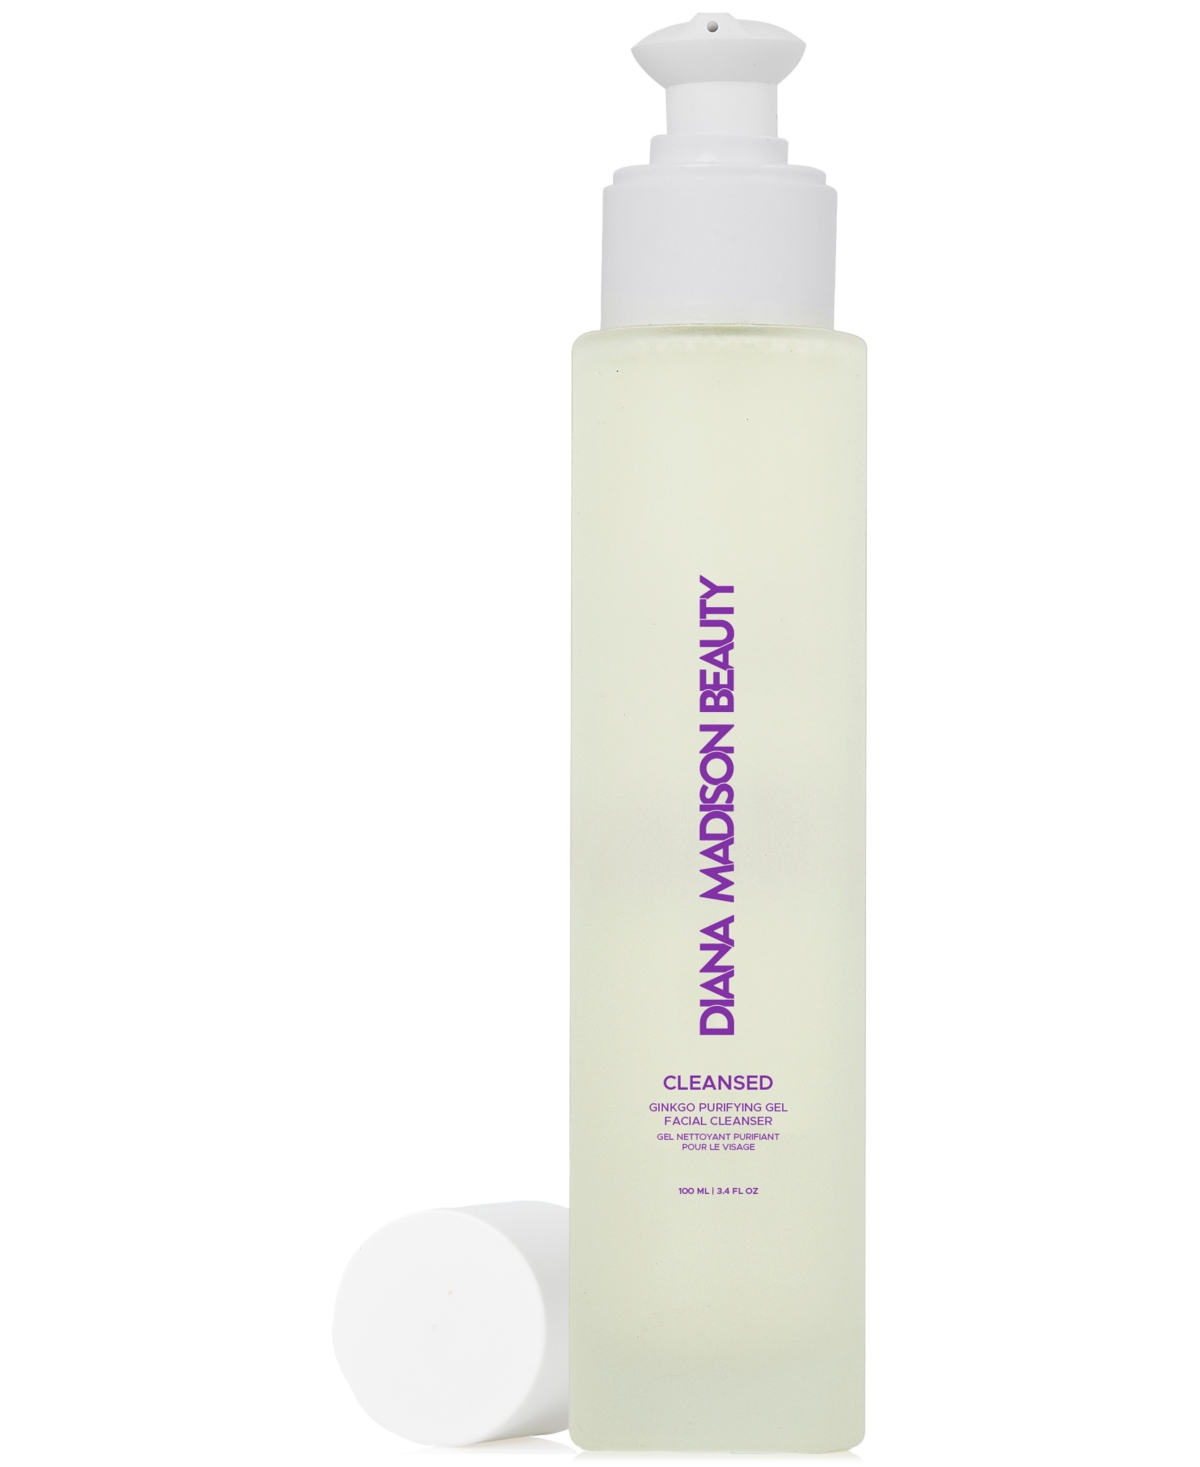 Shop Diana Madison Beauty Cleansed Ginkgo Purifying Gel Facial Cleanser